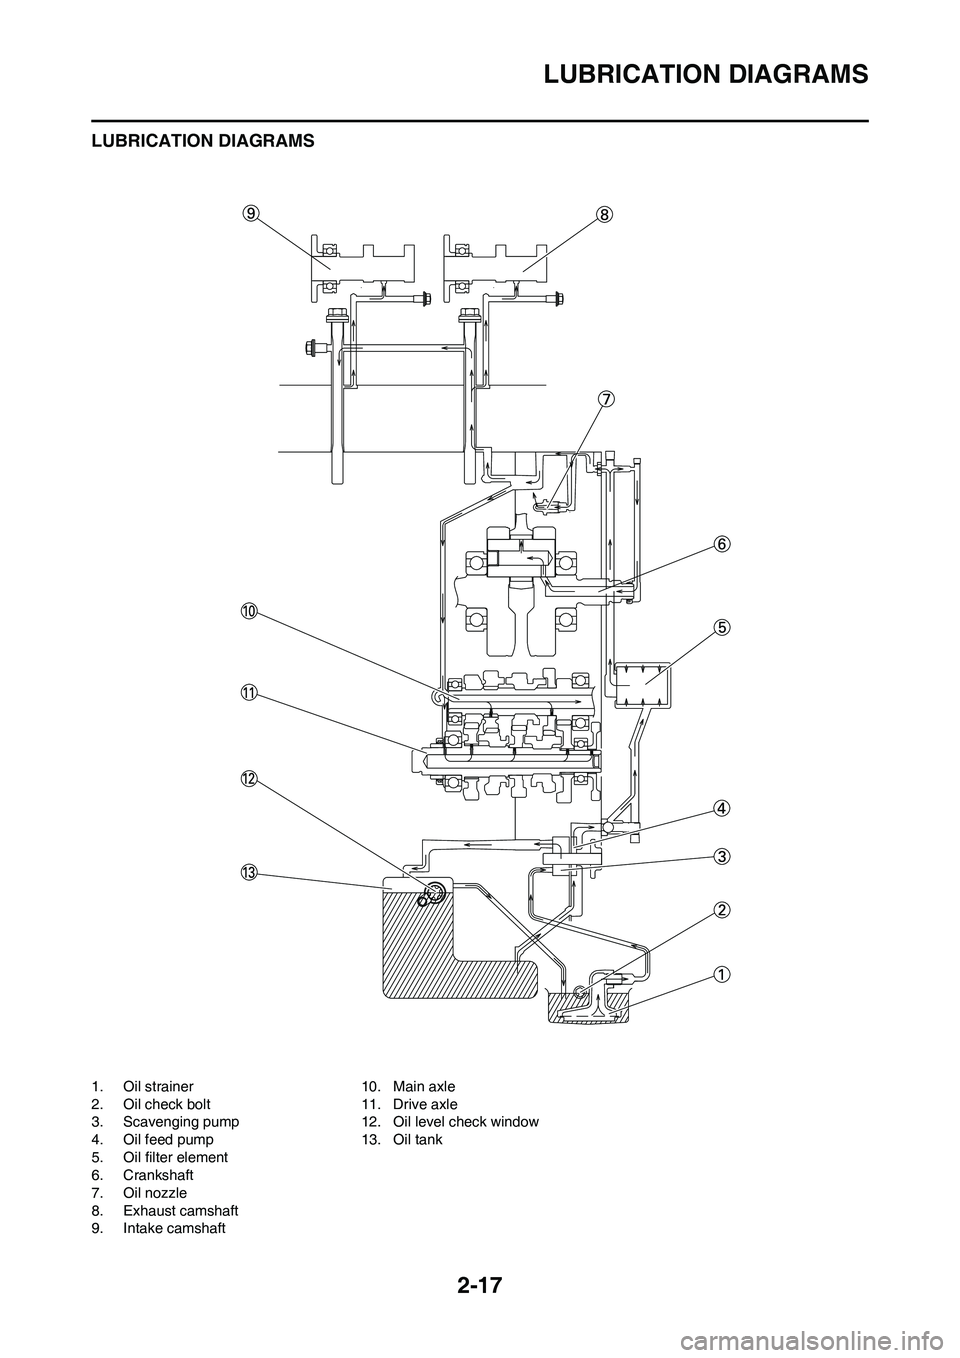 YAMAHA YZ450F 2010  Owners Manual 2-17
LUBRICATION DIAGRAMS
LUBRICATION DIAGRAMS
1. Oil strainer
2. Oil check bolt
3. Scavenging pump
4. Oil feed pump
5. Oil filter element
6. Crankshaft
7. Oil nozzle
8. Exhaust camshaft
9. Intake cam